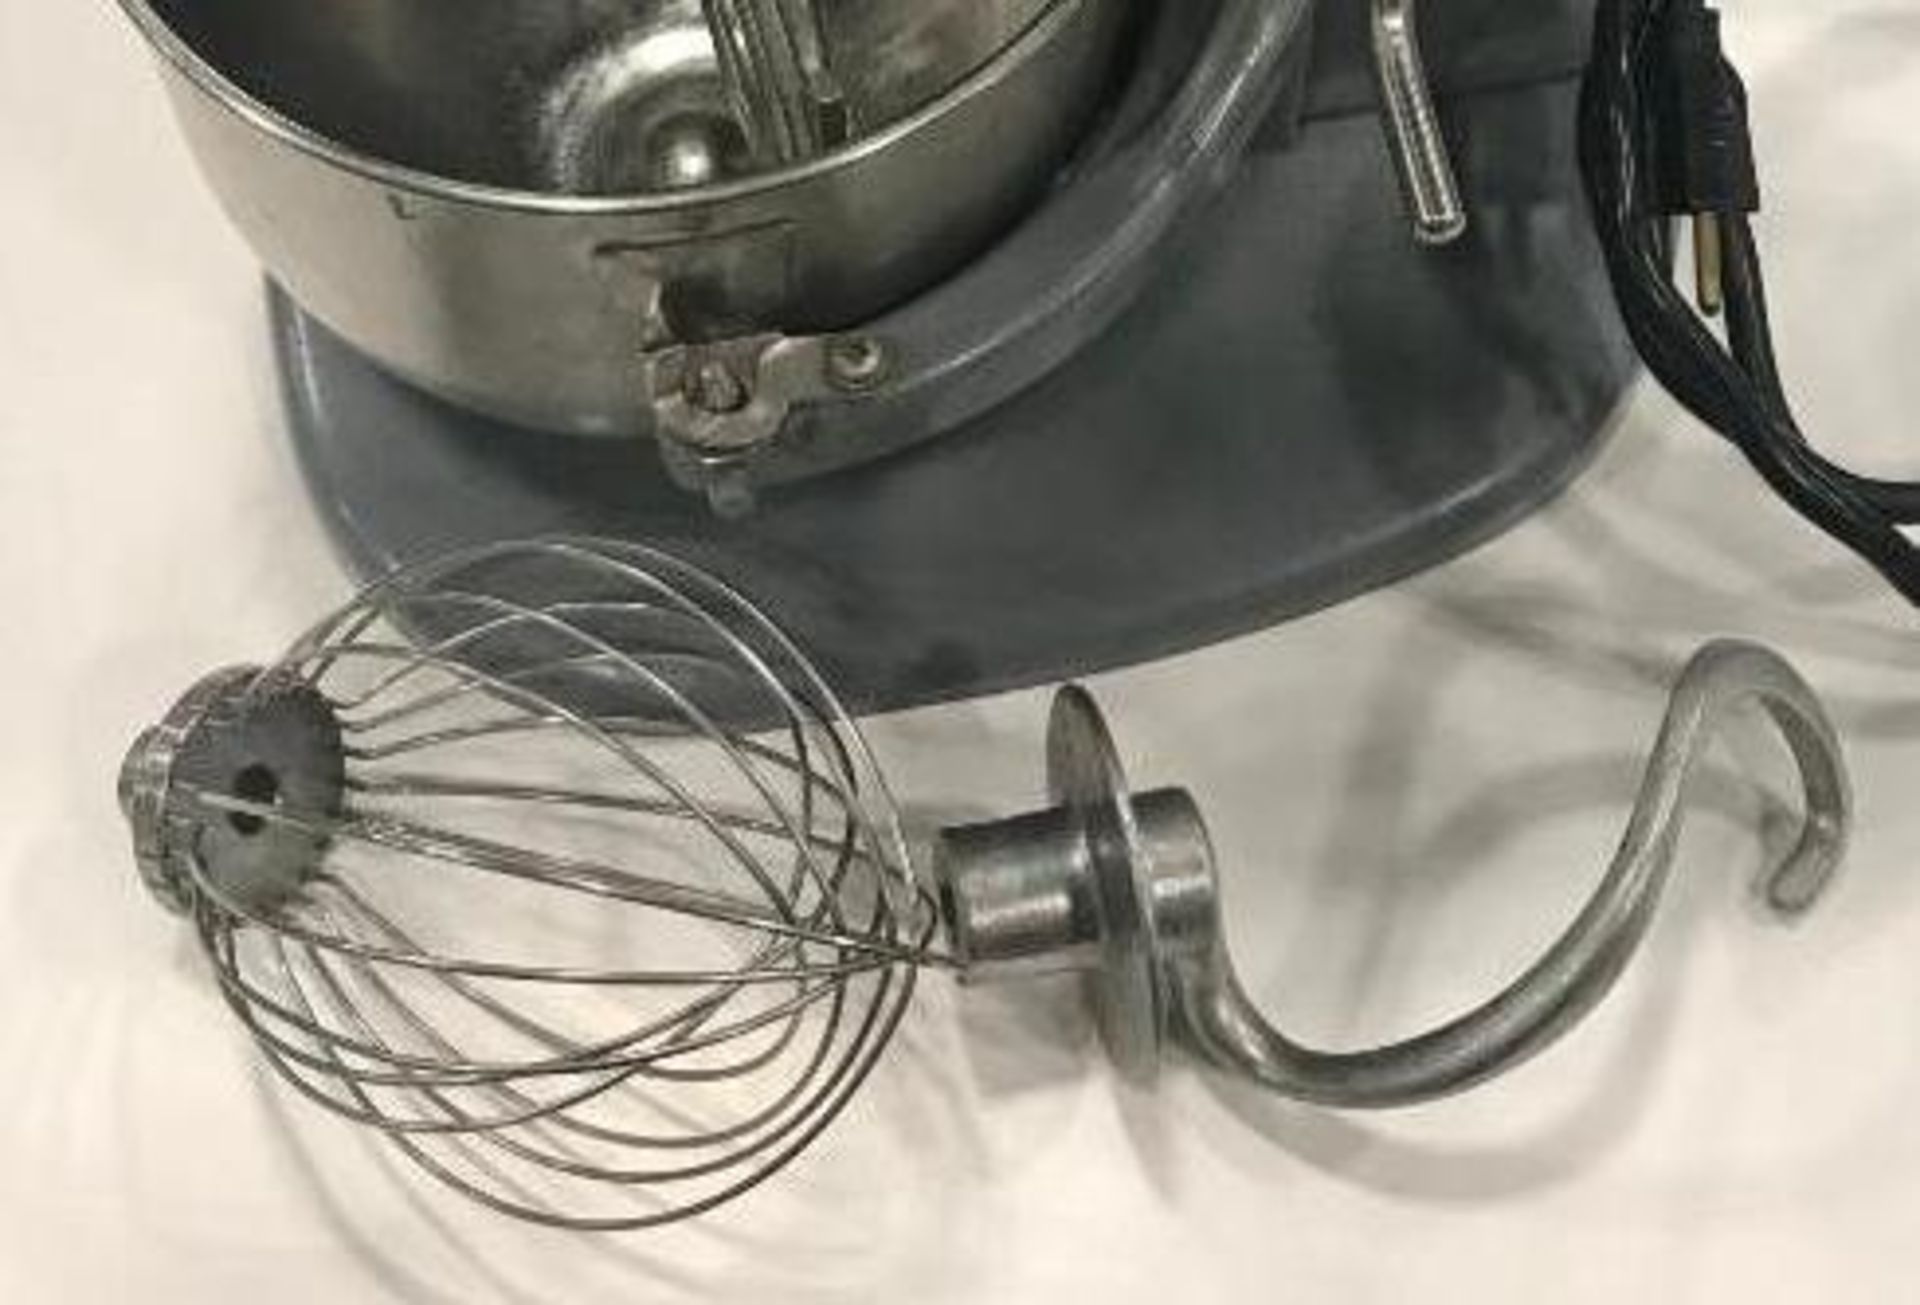 HOBART N50 5QT MIXER WITH HOOK, WHIP, PADDLE - Image 3 of 9